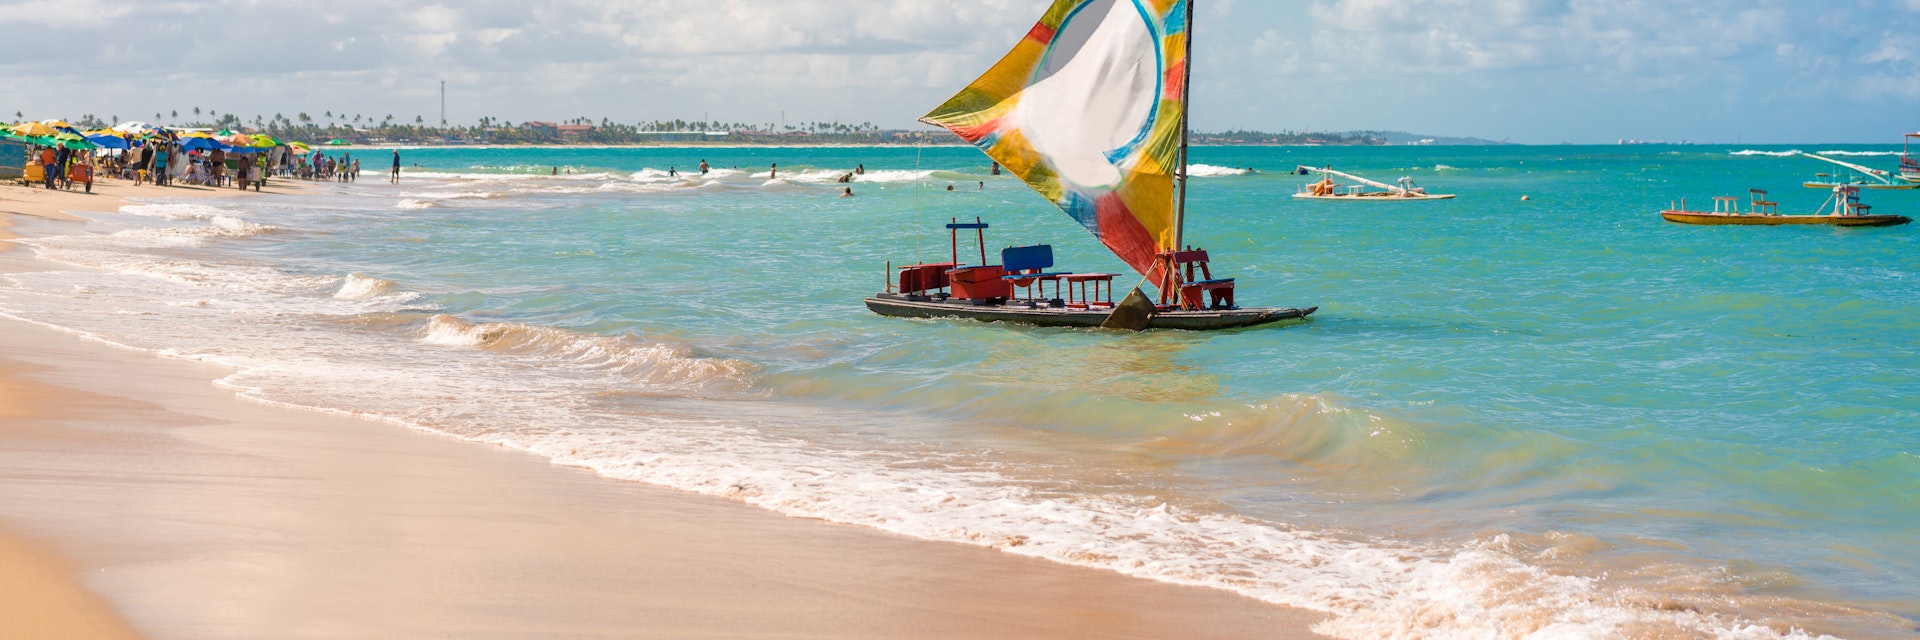 Small sail boat in the water at Porto de Galinhas Beach.